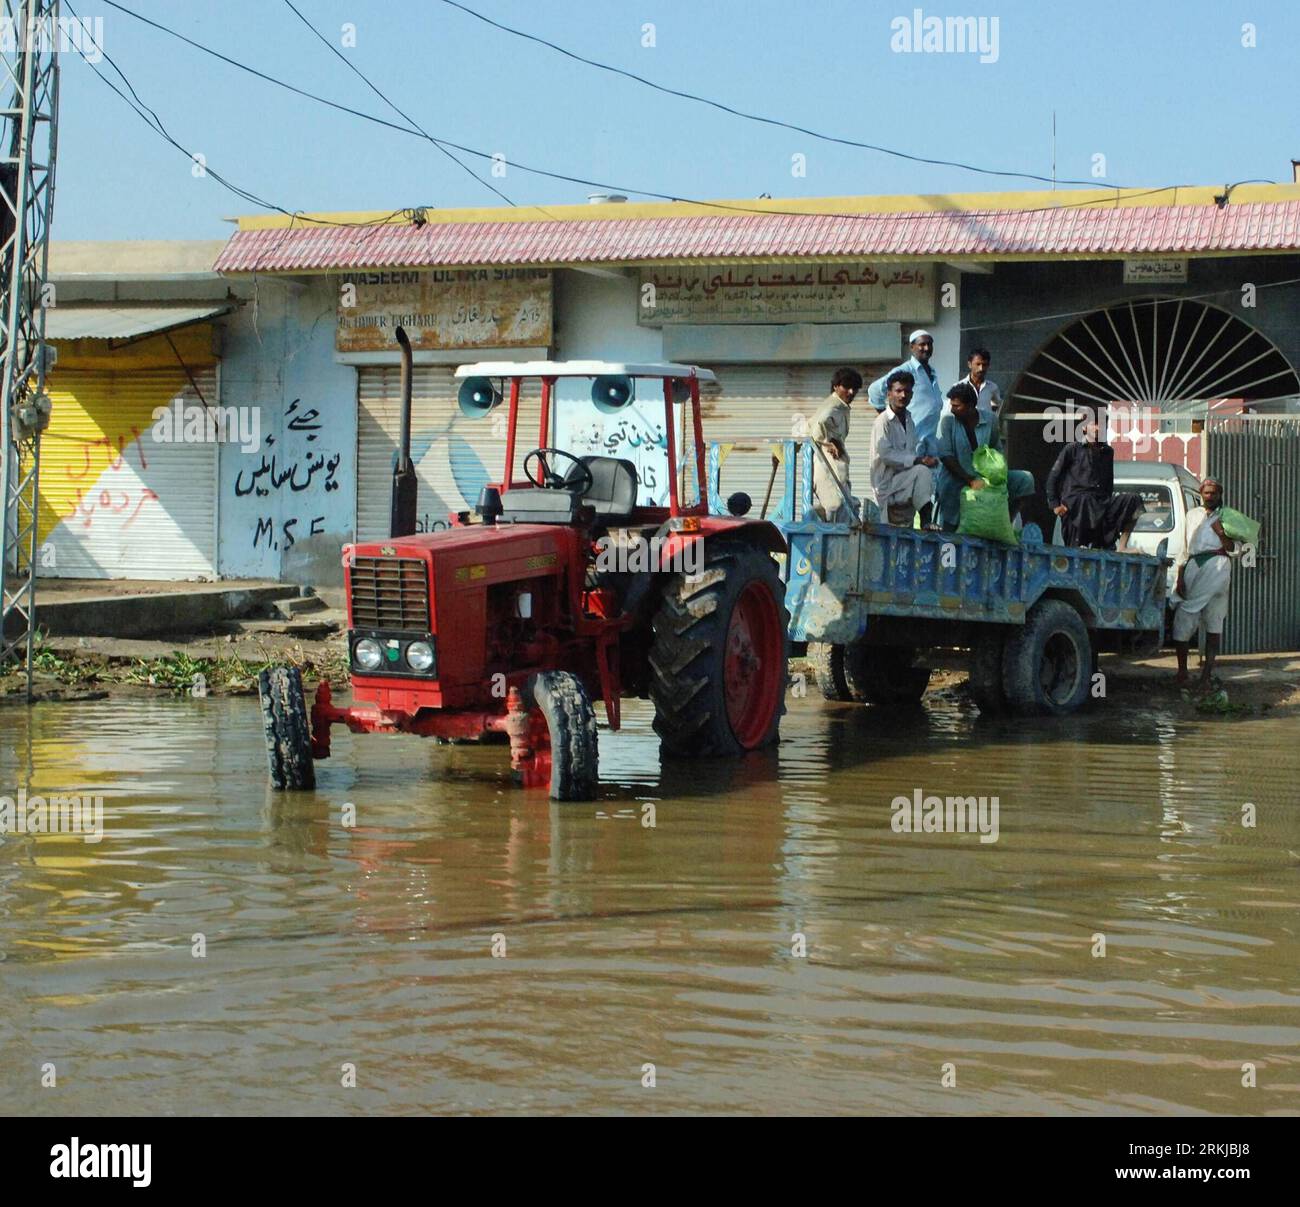 Bildnummer: 56086791  Datum: 23.09.2011  Copyright: imago/Xinhua (110923) -- SINDH, Sept. 23, 2011 (Xinhua) -- on a tractor cross a flooded road in the flood-hit Sanghar district of Pakistan s Sindh province, Sept. 23, 2011. Two million Pakistanis have fallen ill since monsoon rains left the southern region under several feet of water, the country s disaster authority said. More than 350 have been killed and over eight million have been affected this year by floods. (Xinhua/Ahmad Kamal) PAKISTAN-SINDH-FLOOD PUBLICATIONxNOTxINxCHN Gesellschaft Naturkatastrophe Hochwasser Opfer xda x0x 2011 quad Stock Photo